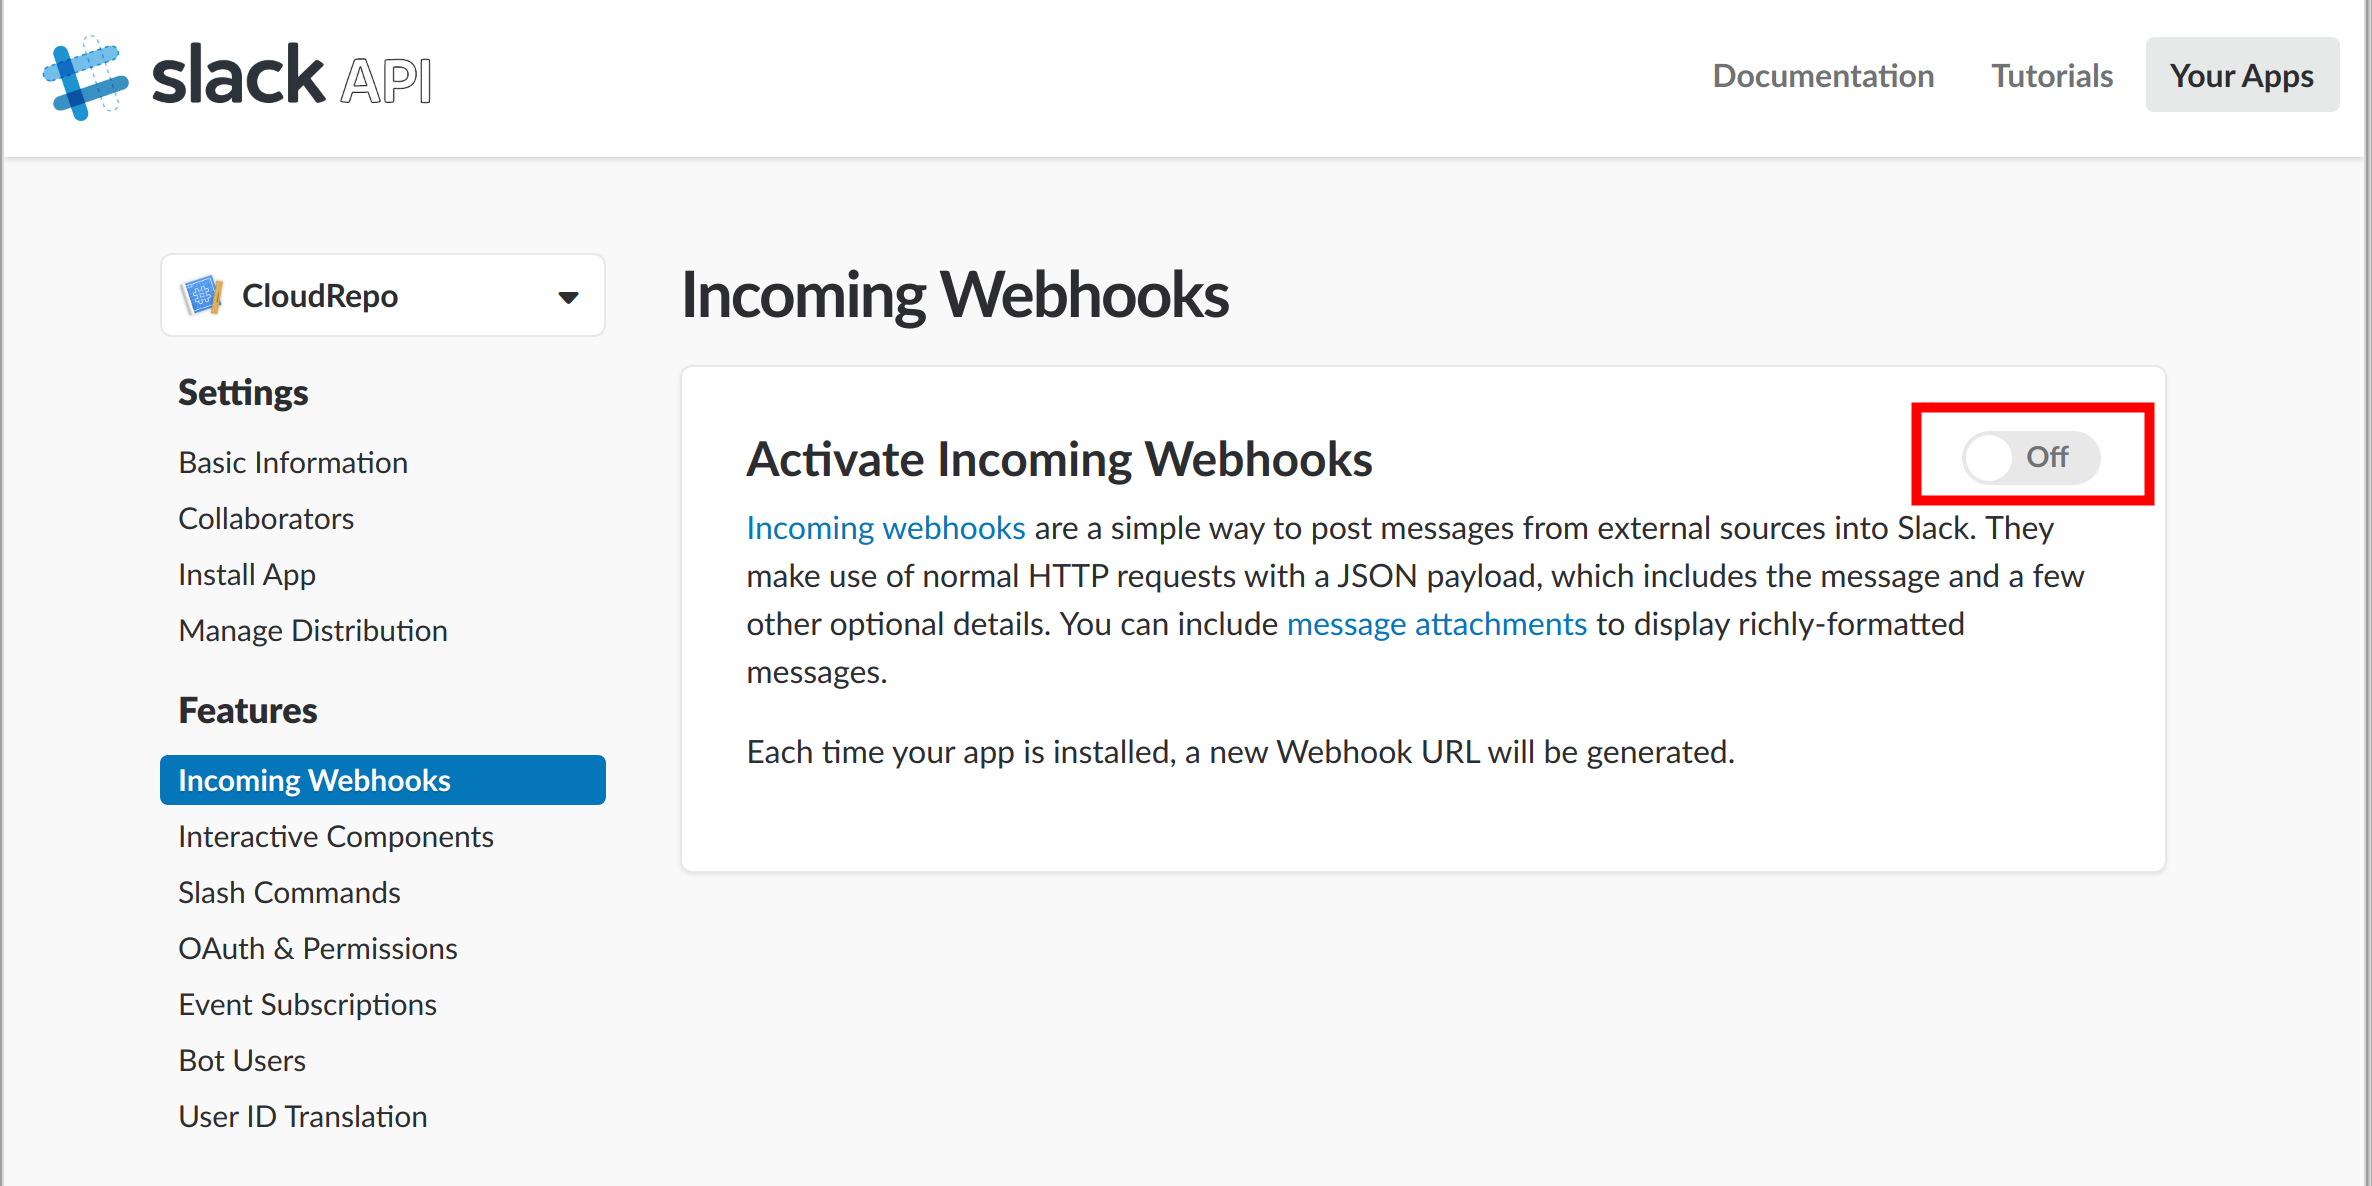 _images/400-activate-incoming-webhooks.png